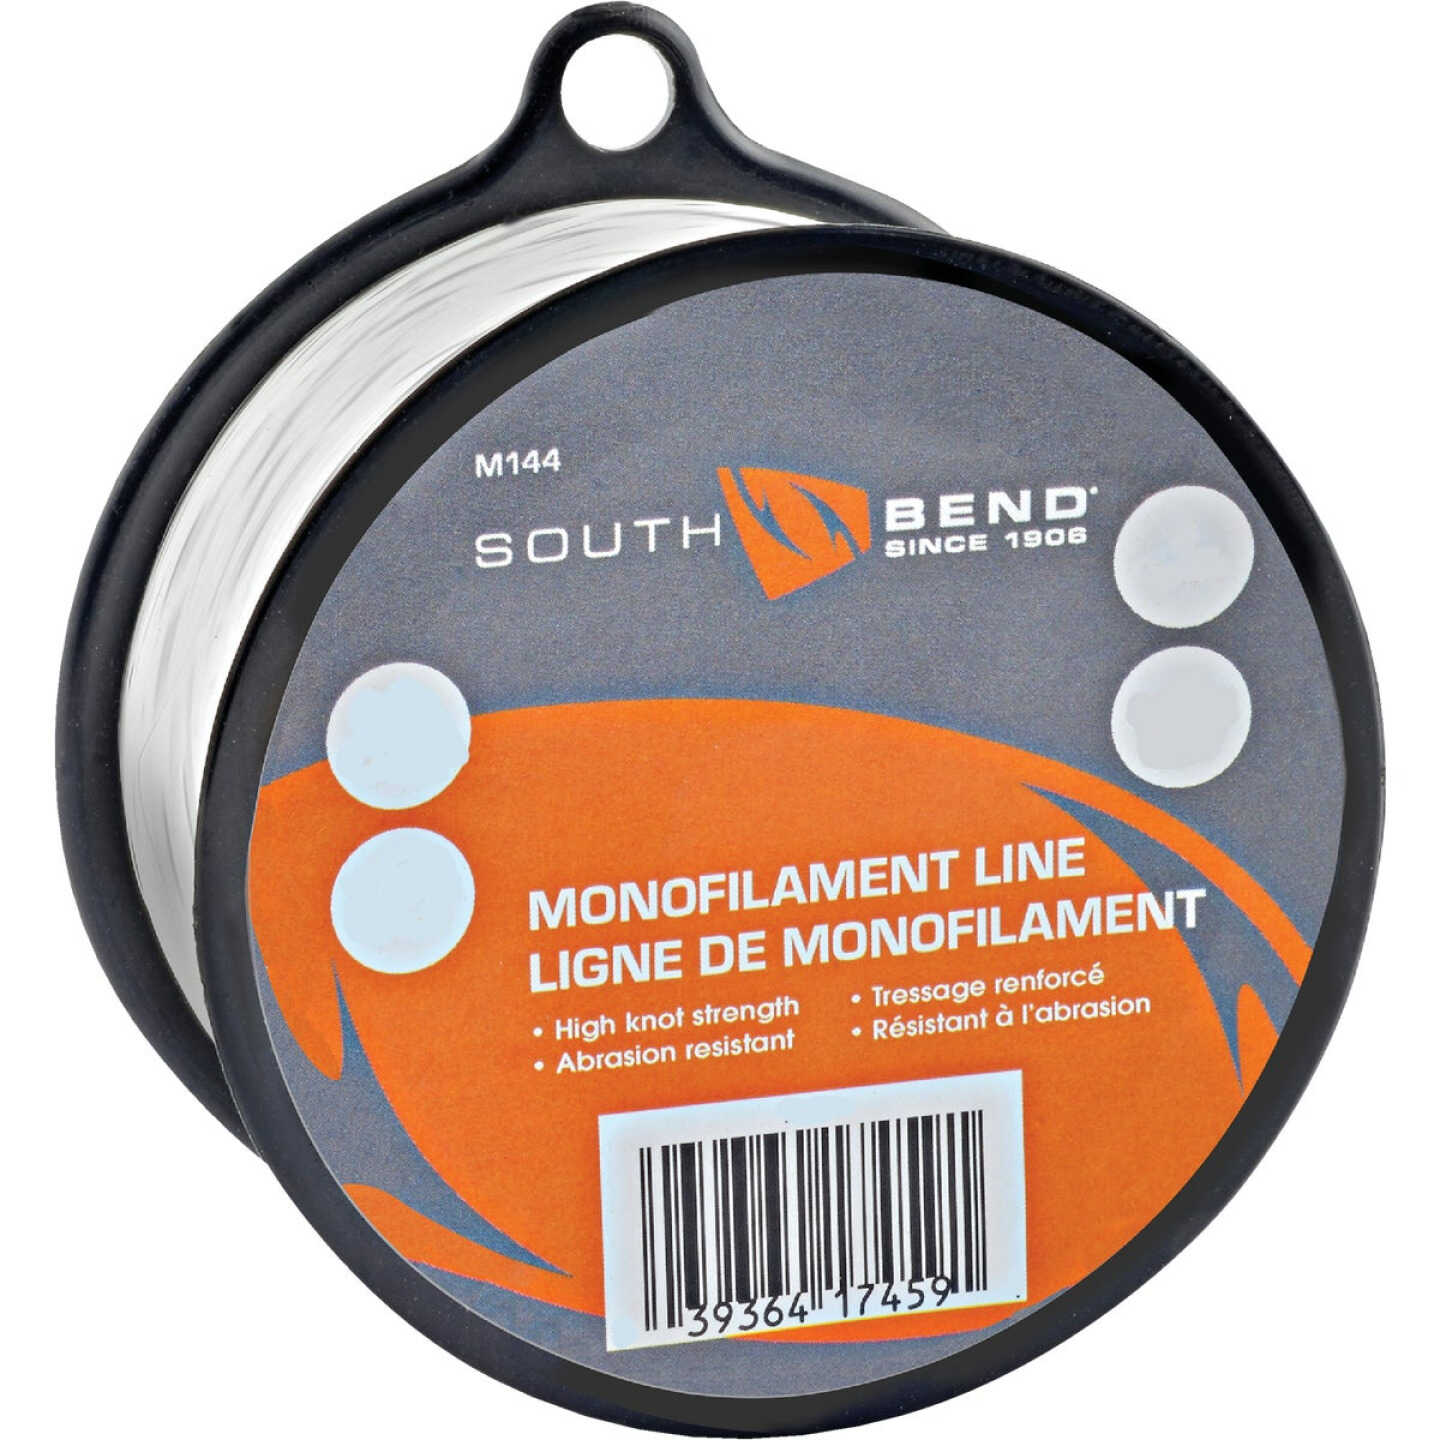 SouthBend 15 Lb. 370 Yd. Clear Monofilament Fishing Line - Jerry's